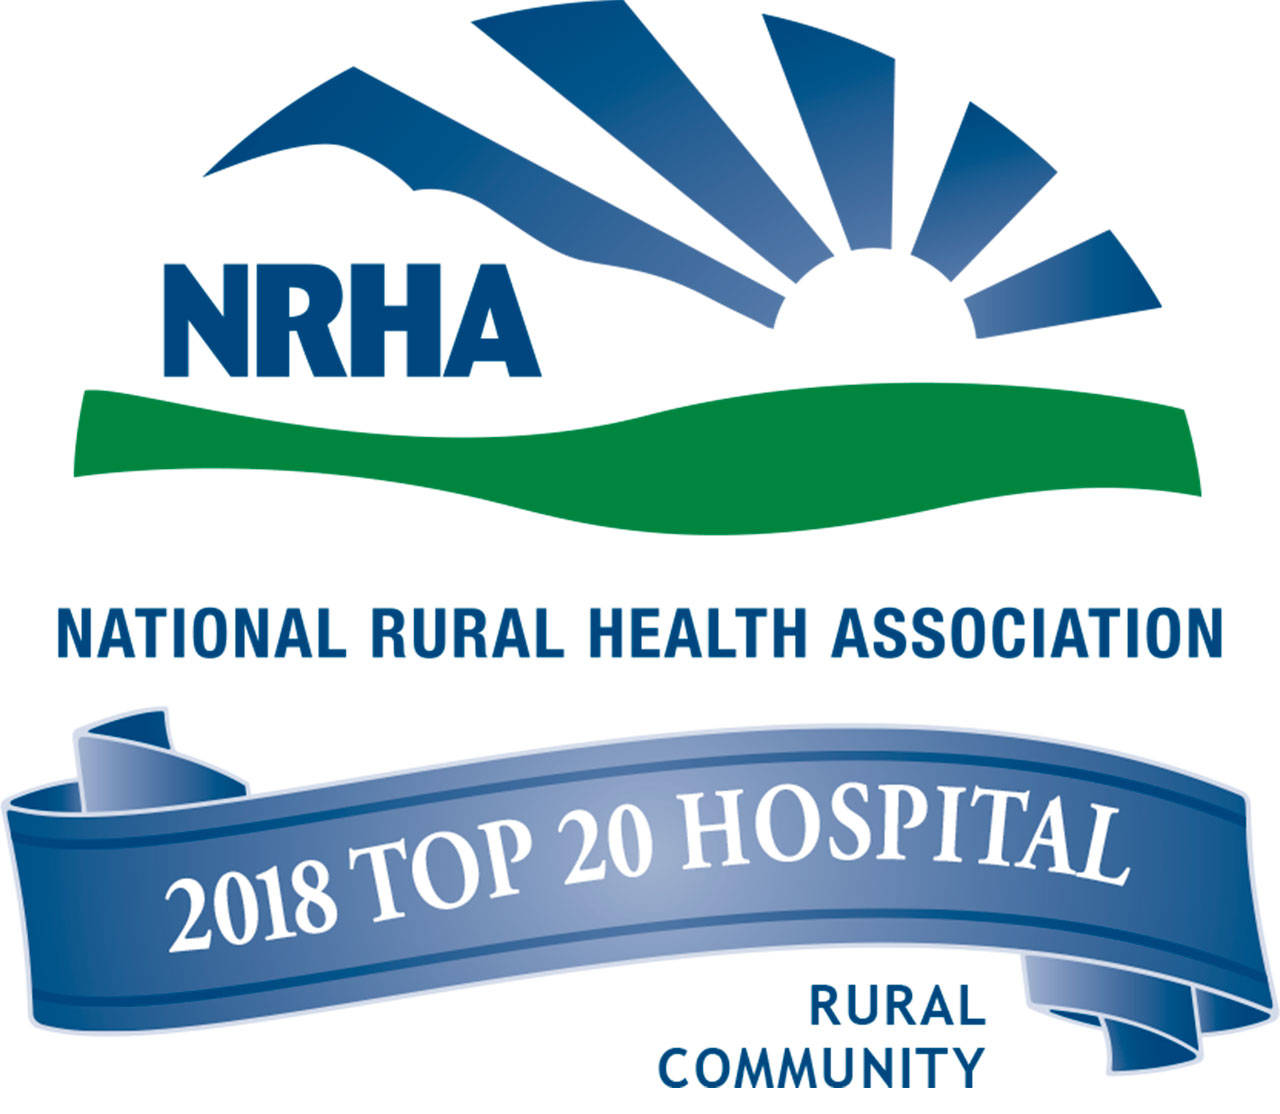 OMC named top 20 rural community hospital in consecutive years